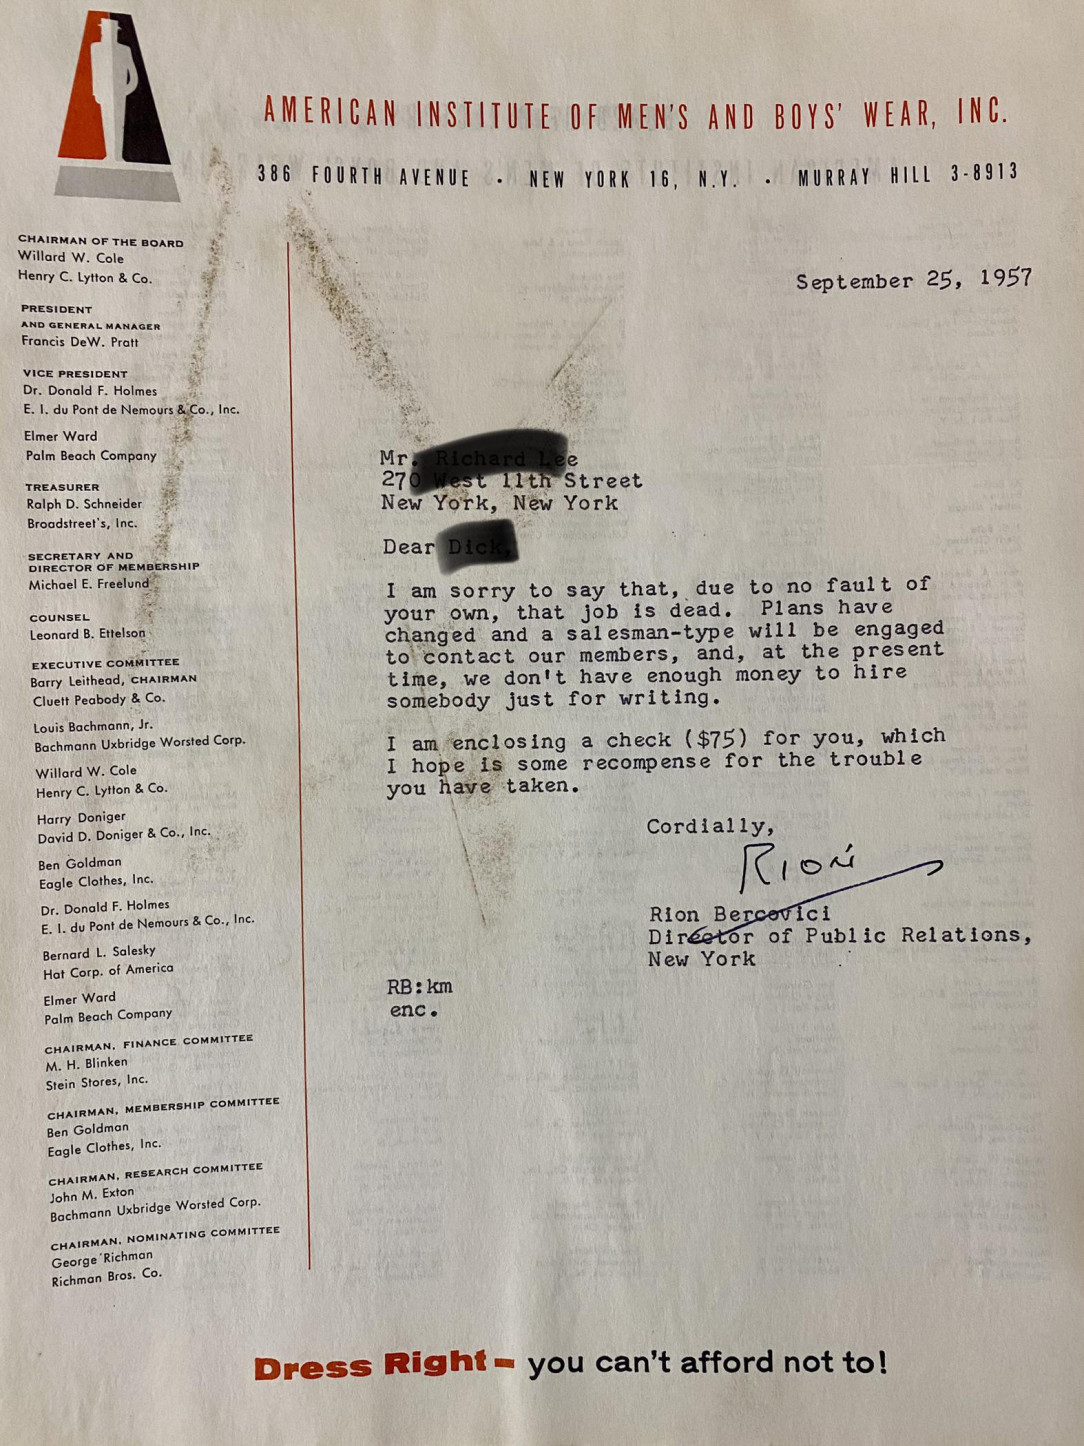 “That job is dead. ” 1957 rejection letter found among old papers